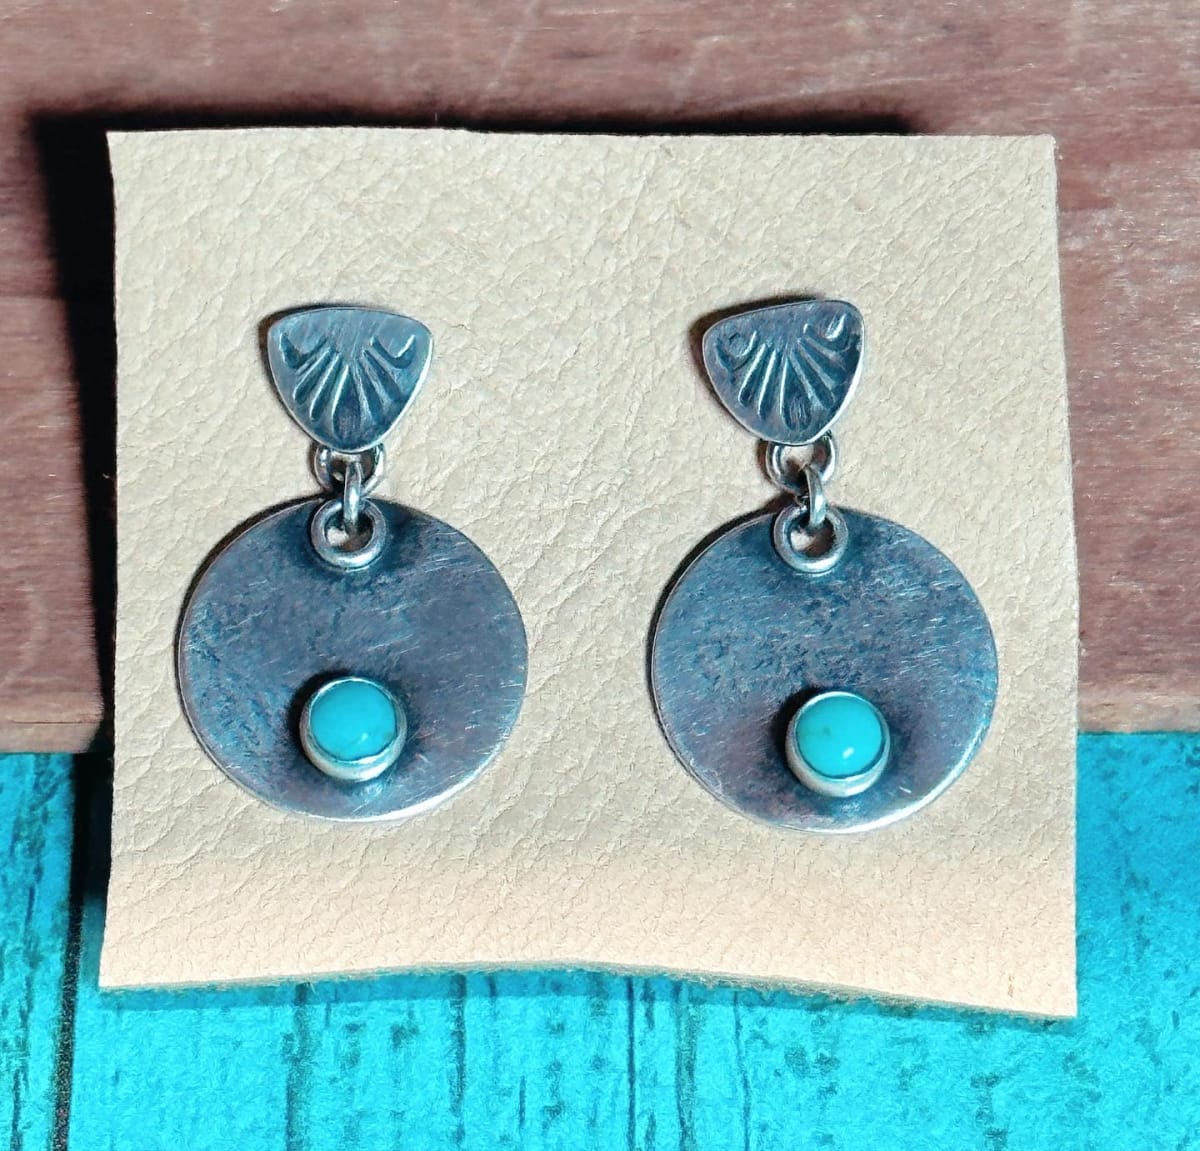 "Single Stone Stamped Luna Earrings" - Sterling Silver and Kingman Turquoise, Shell Stamp Detail by Shasta Brooks  Image: All Art © Shasta Brooks Studio LLC